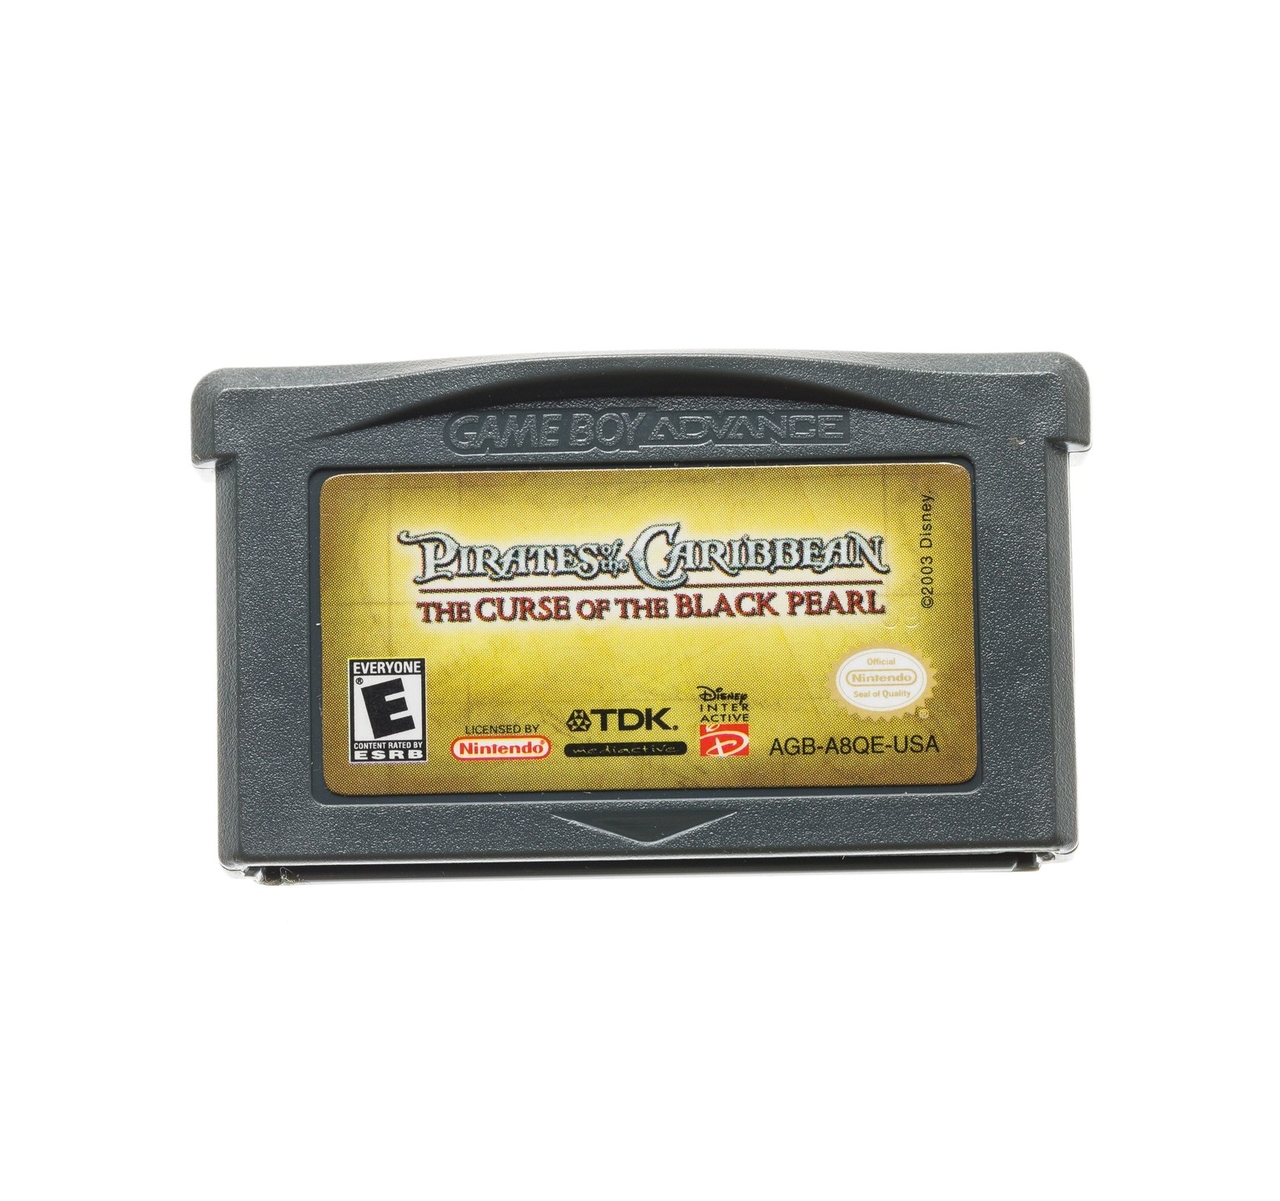 Pirates of the Carribean The Curse of the Black Pearl Kopen | Gameboy Advance Games